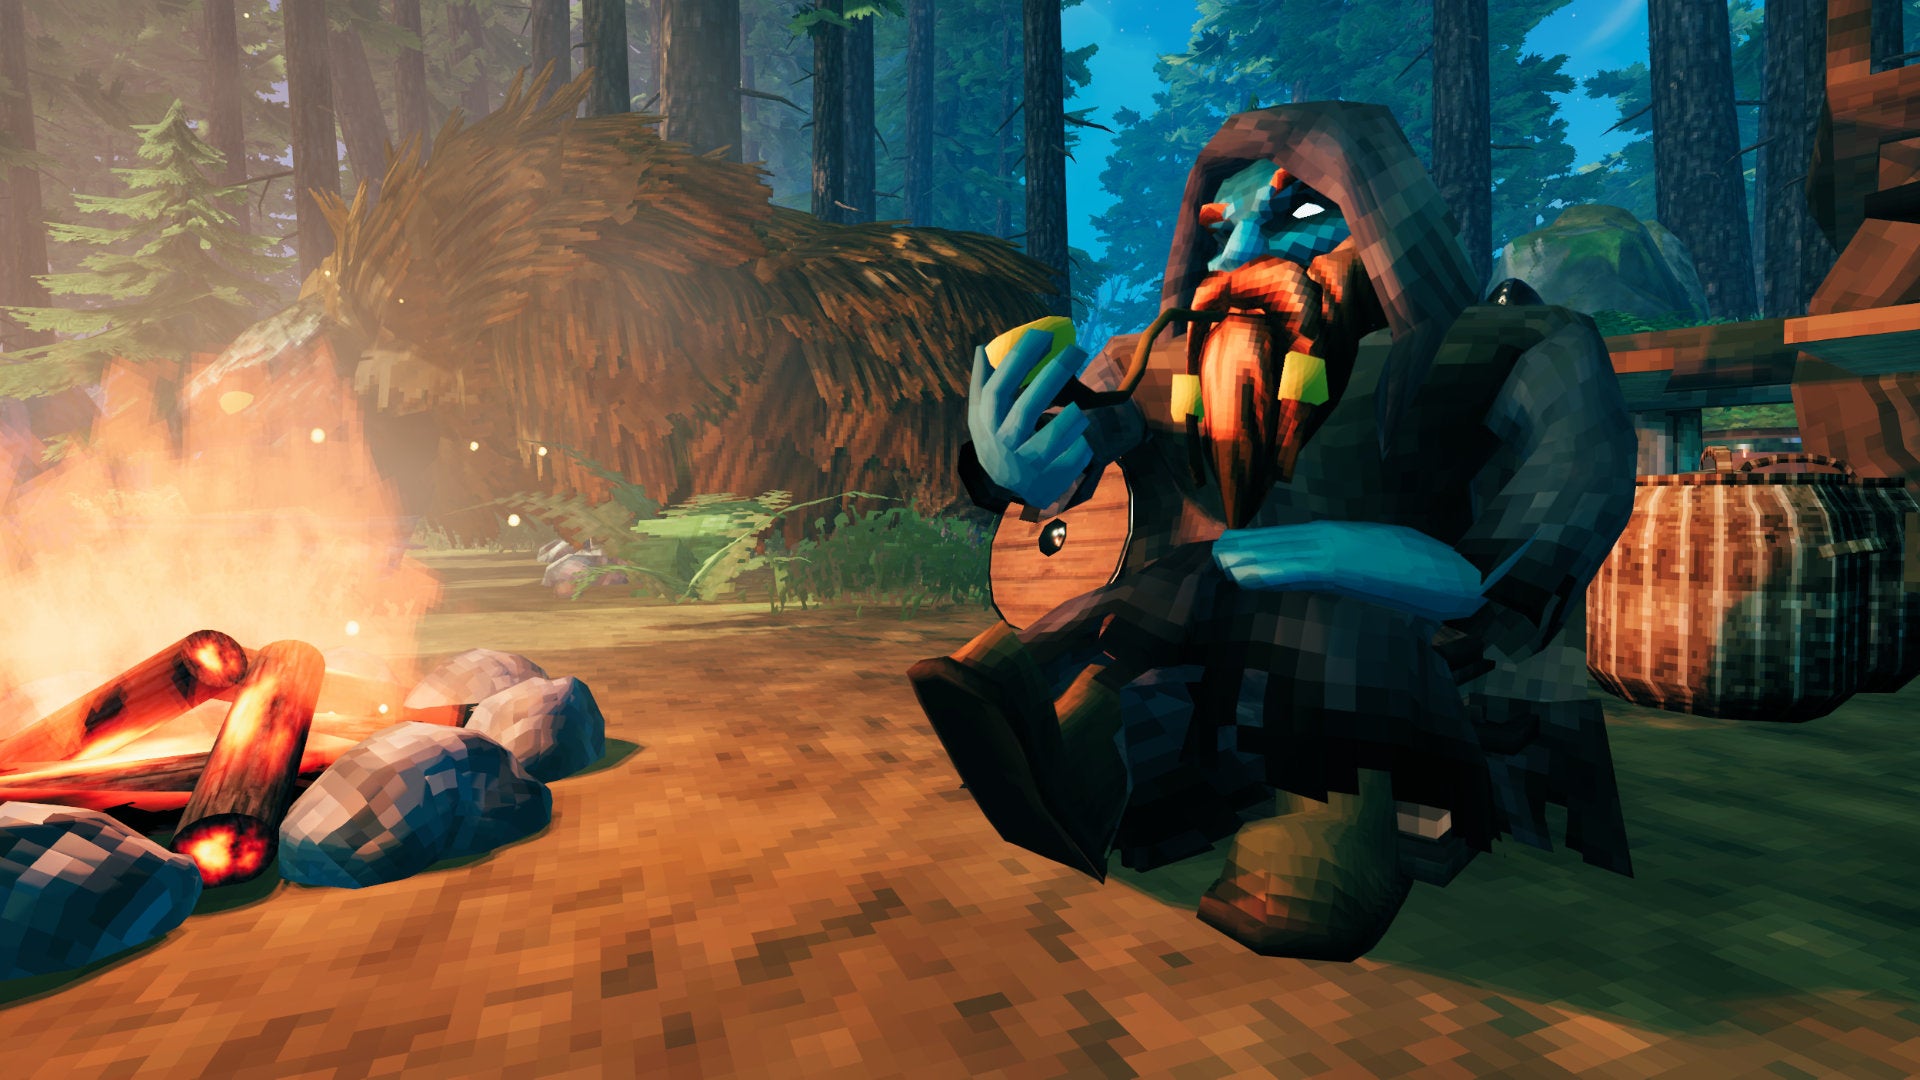 A Valheim screenshot of Haldor the Trader sitting by the fire, smoking a pipe, with Halstein, his beast of burden, in the background.